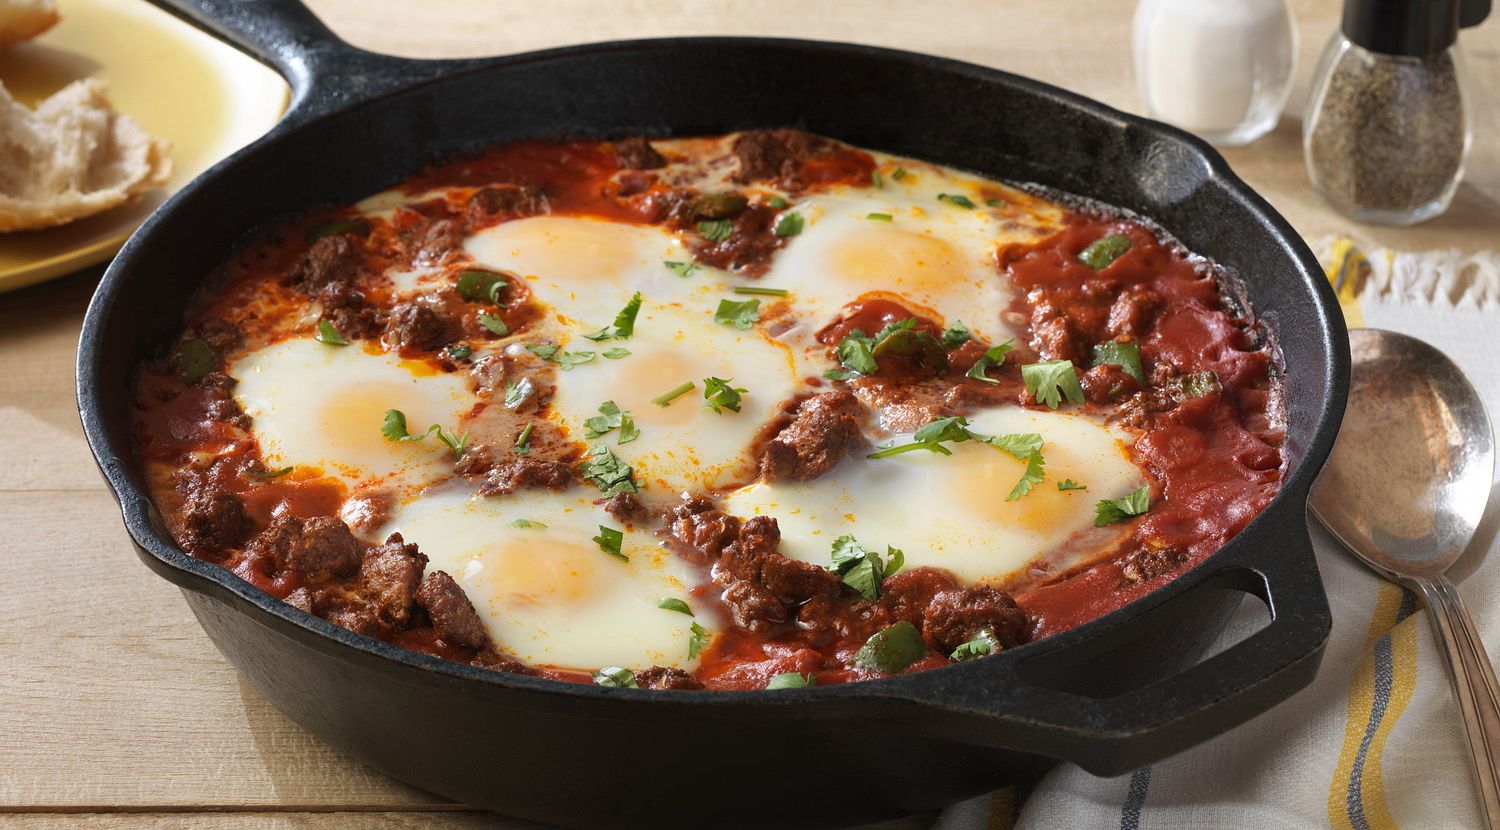 Saucy Beef with Baked Eggs